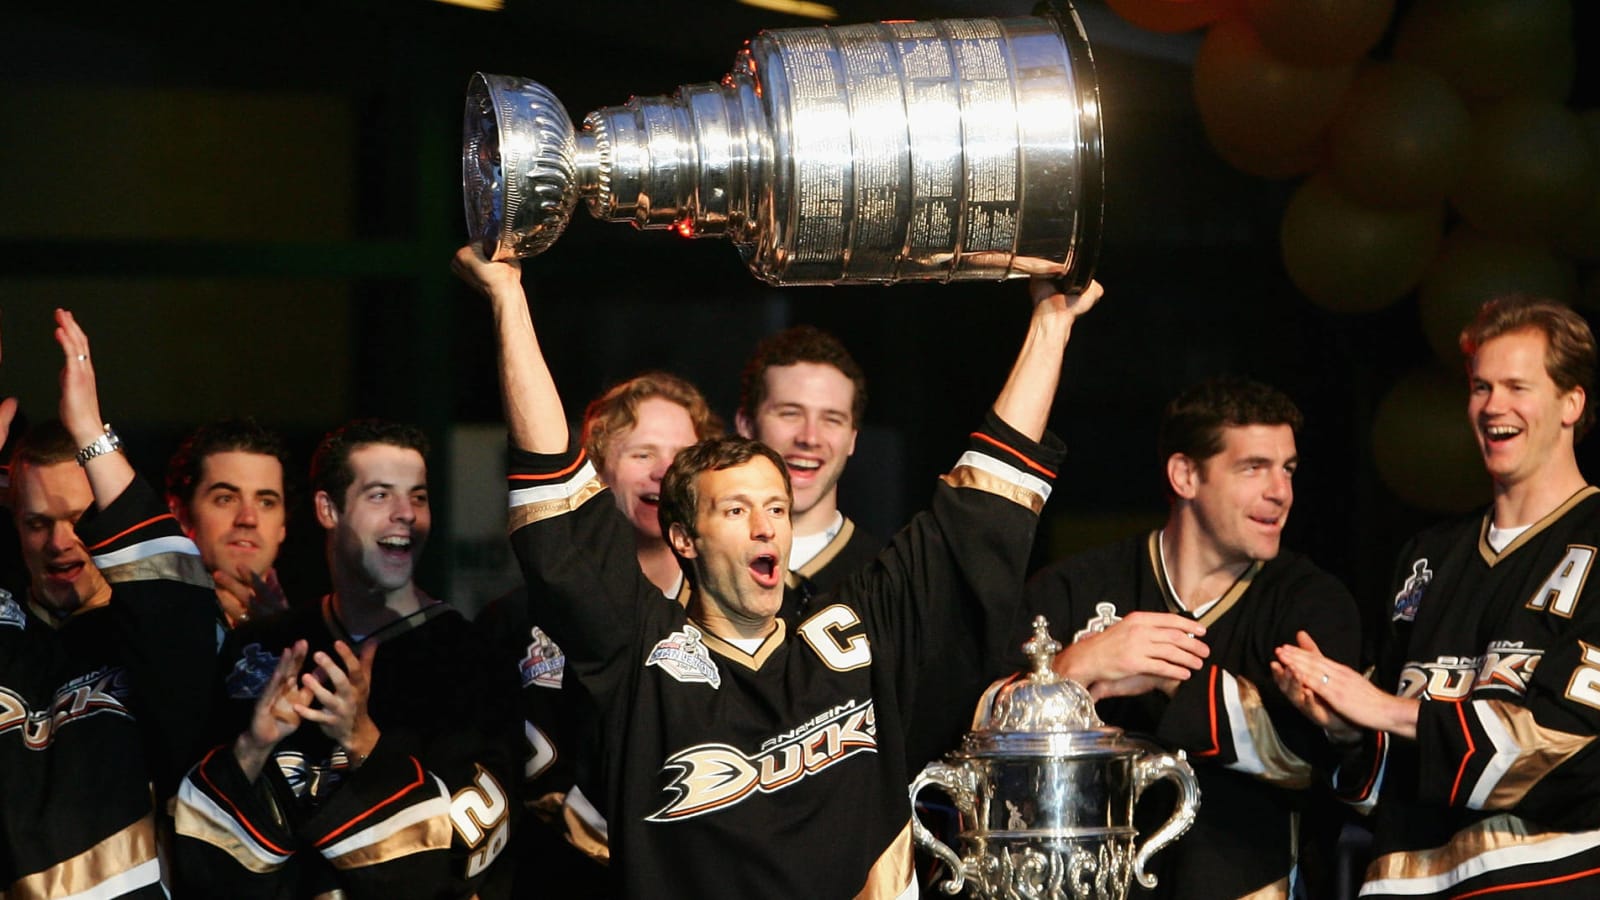 A decade after winning the Stanley Cup title, the 2006-07 Ducks